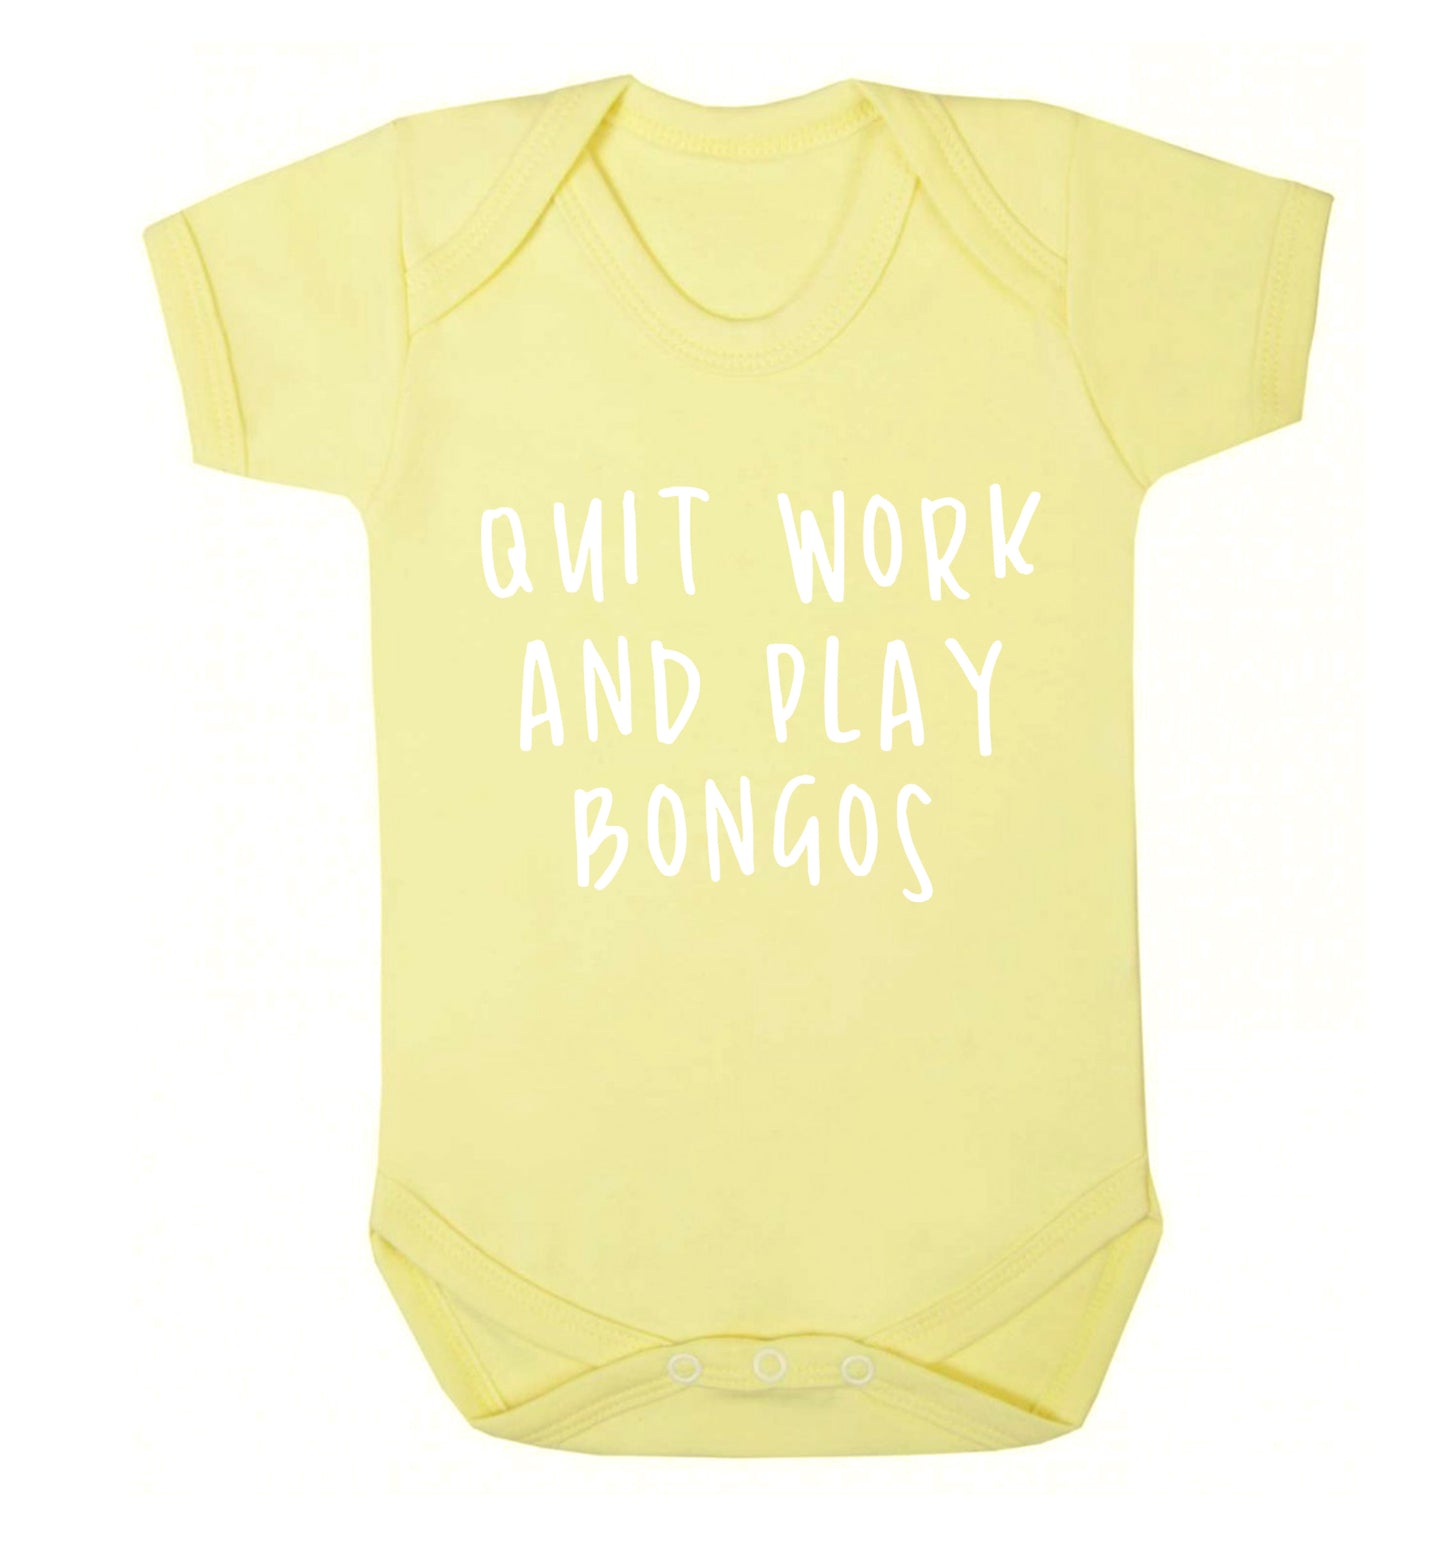 Quit work and play bongos Baby Vest pale yellow 18-24 months